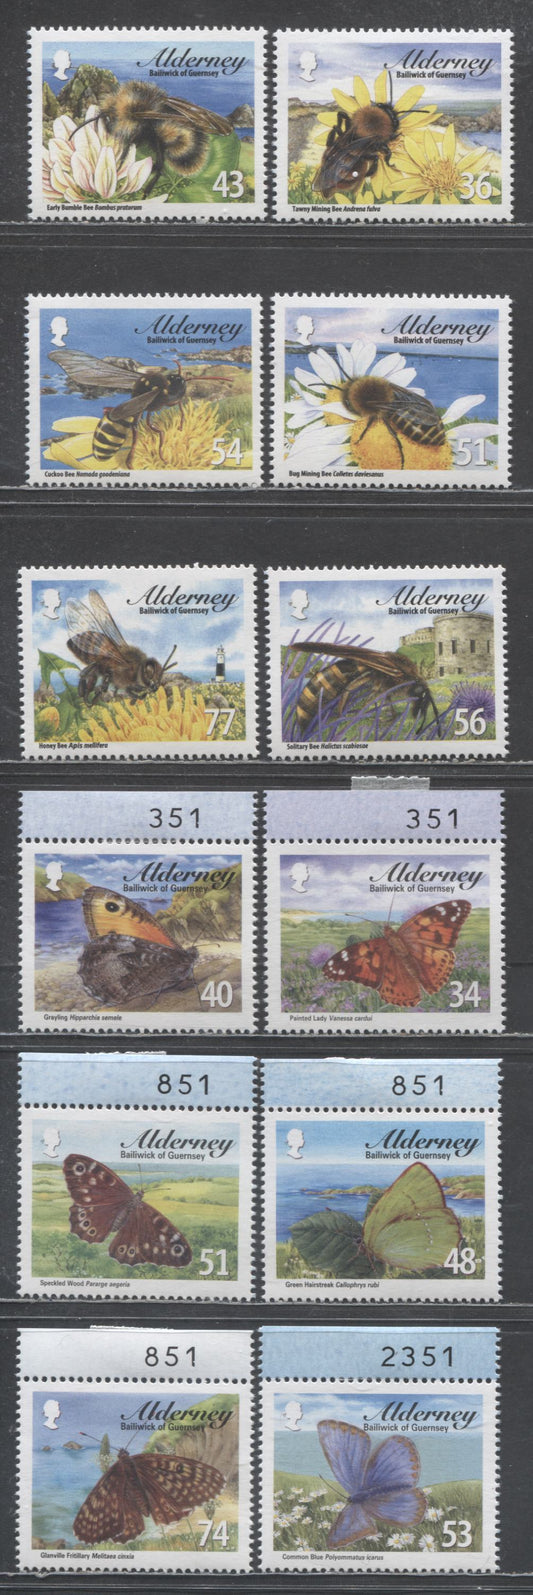 Lot 118 Alderney SC#313/343 2008-2009 Butterflies & Bees Issues, 12 VFNH Singles, Click on Listing to See ALL Pictures, 2017 Scott Cat. $21.5